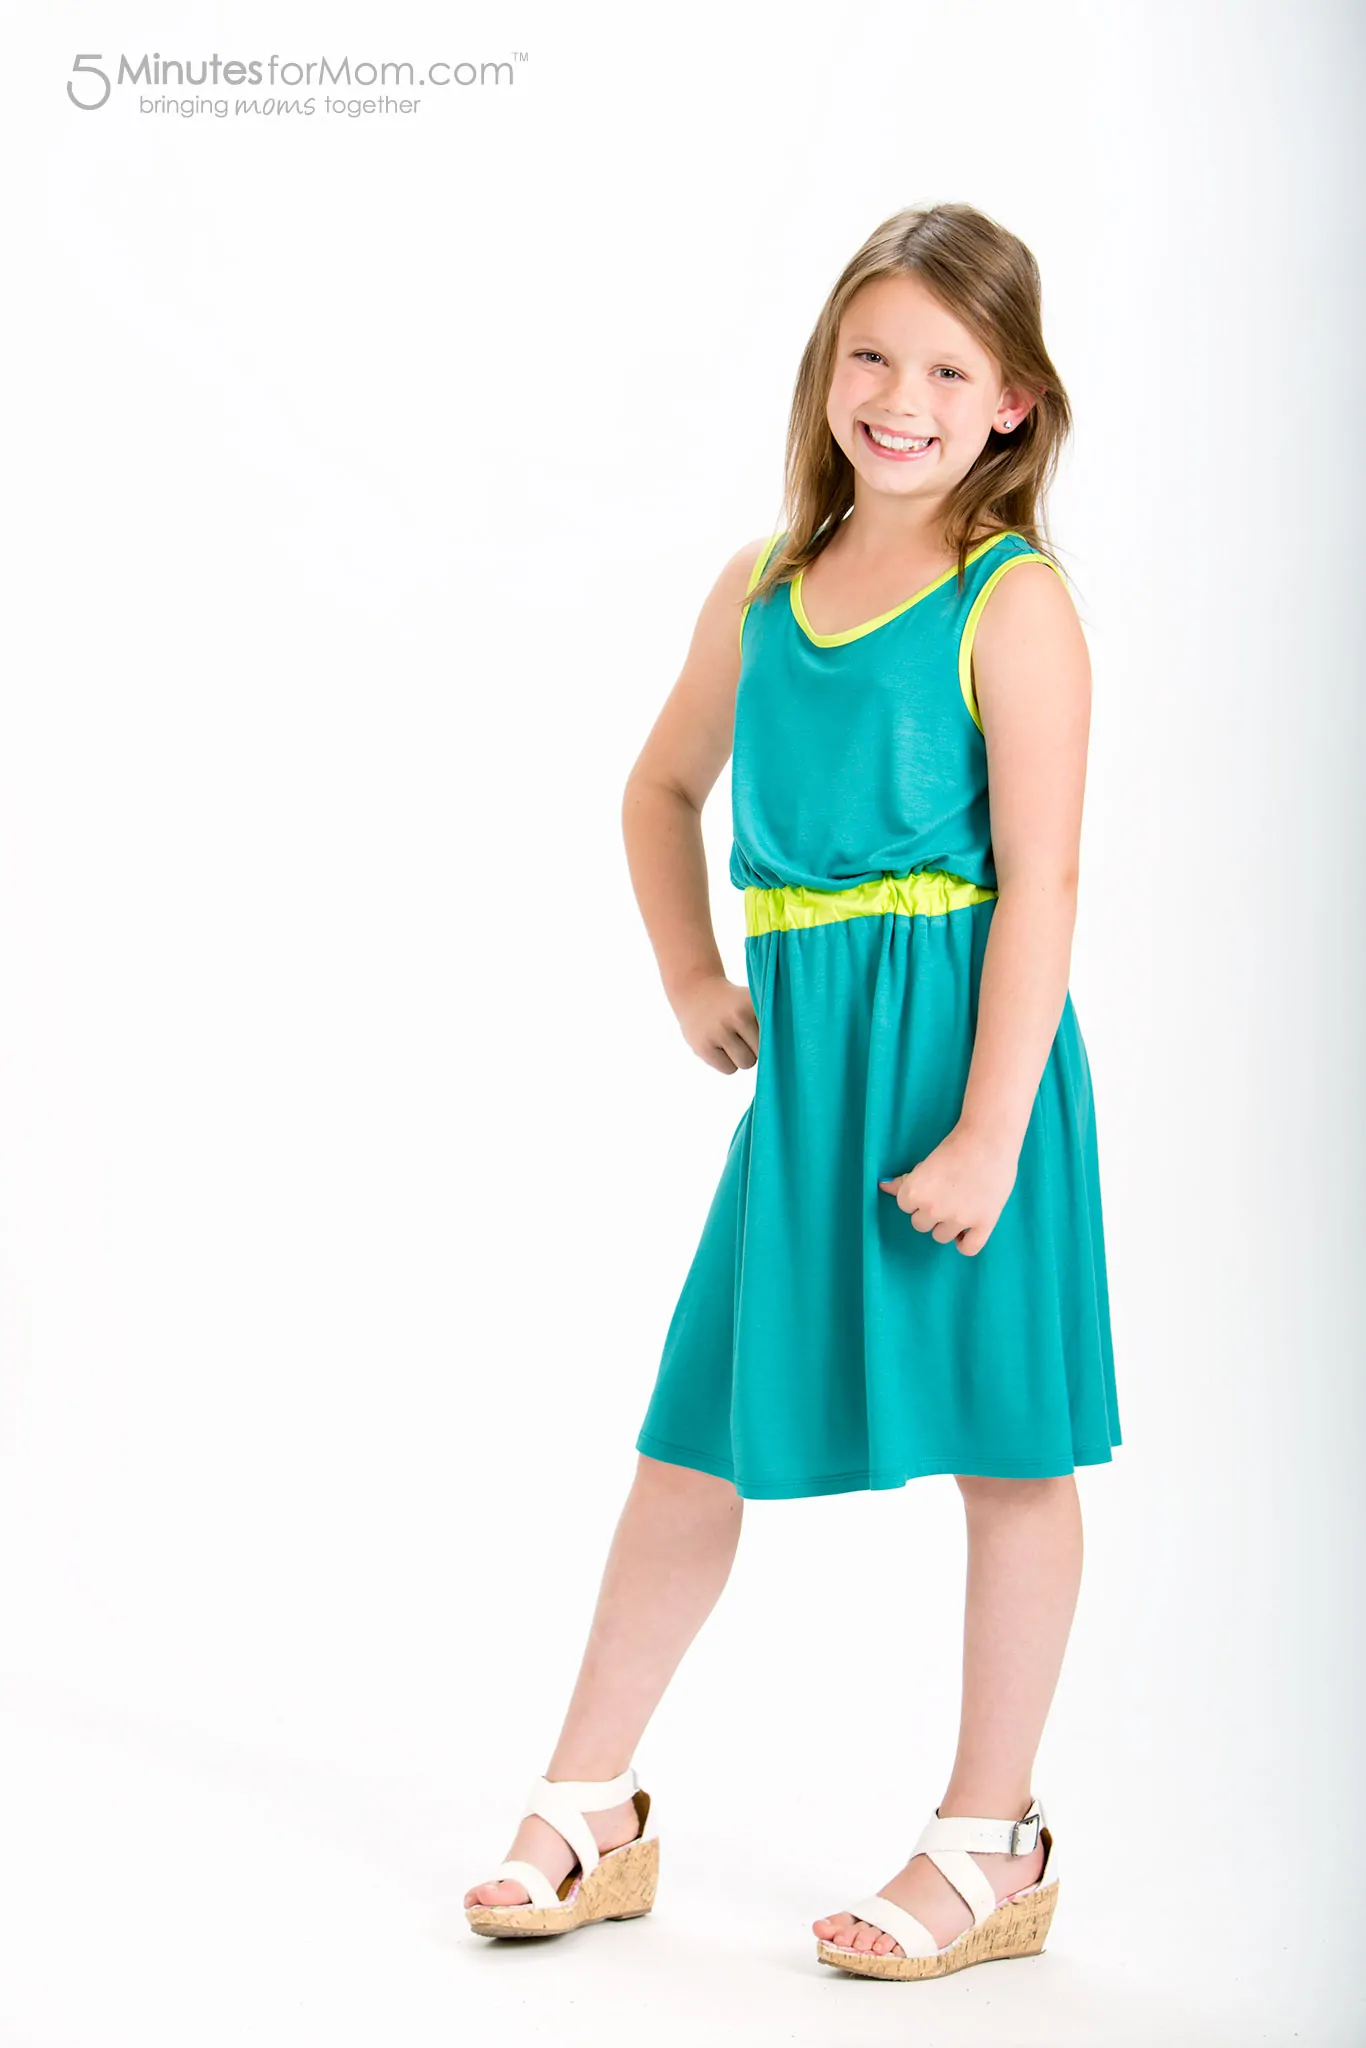 Evelyn Alex - Clothes for Tween Girls - Green Dress for Tweens